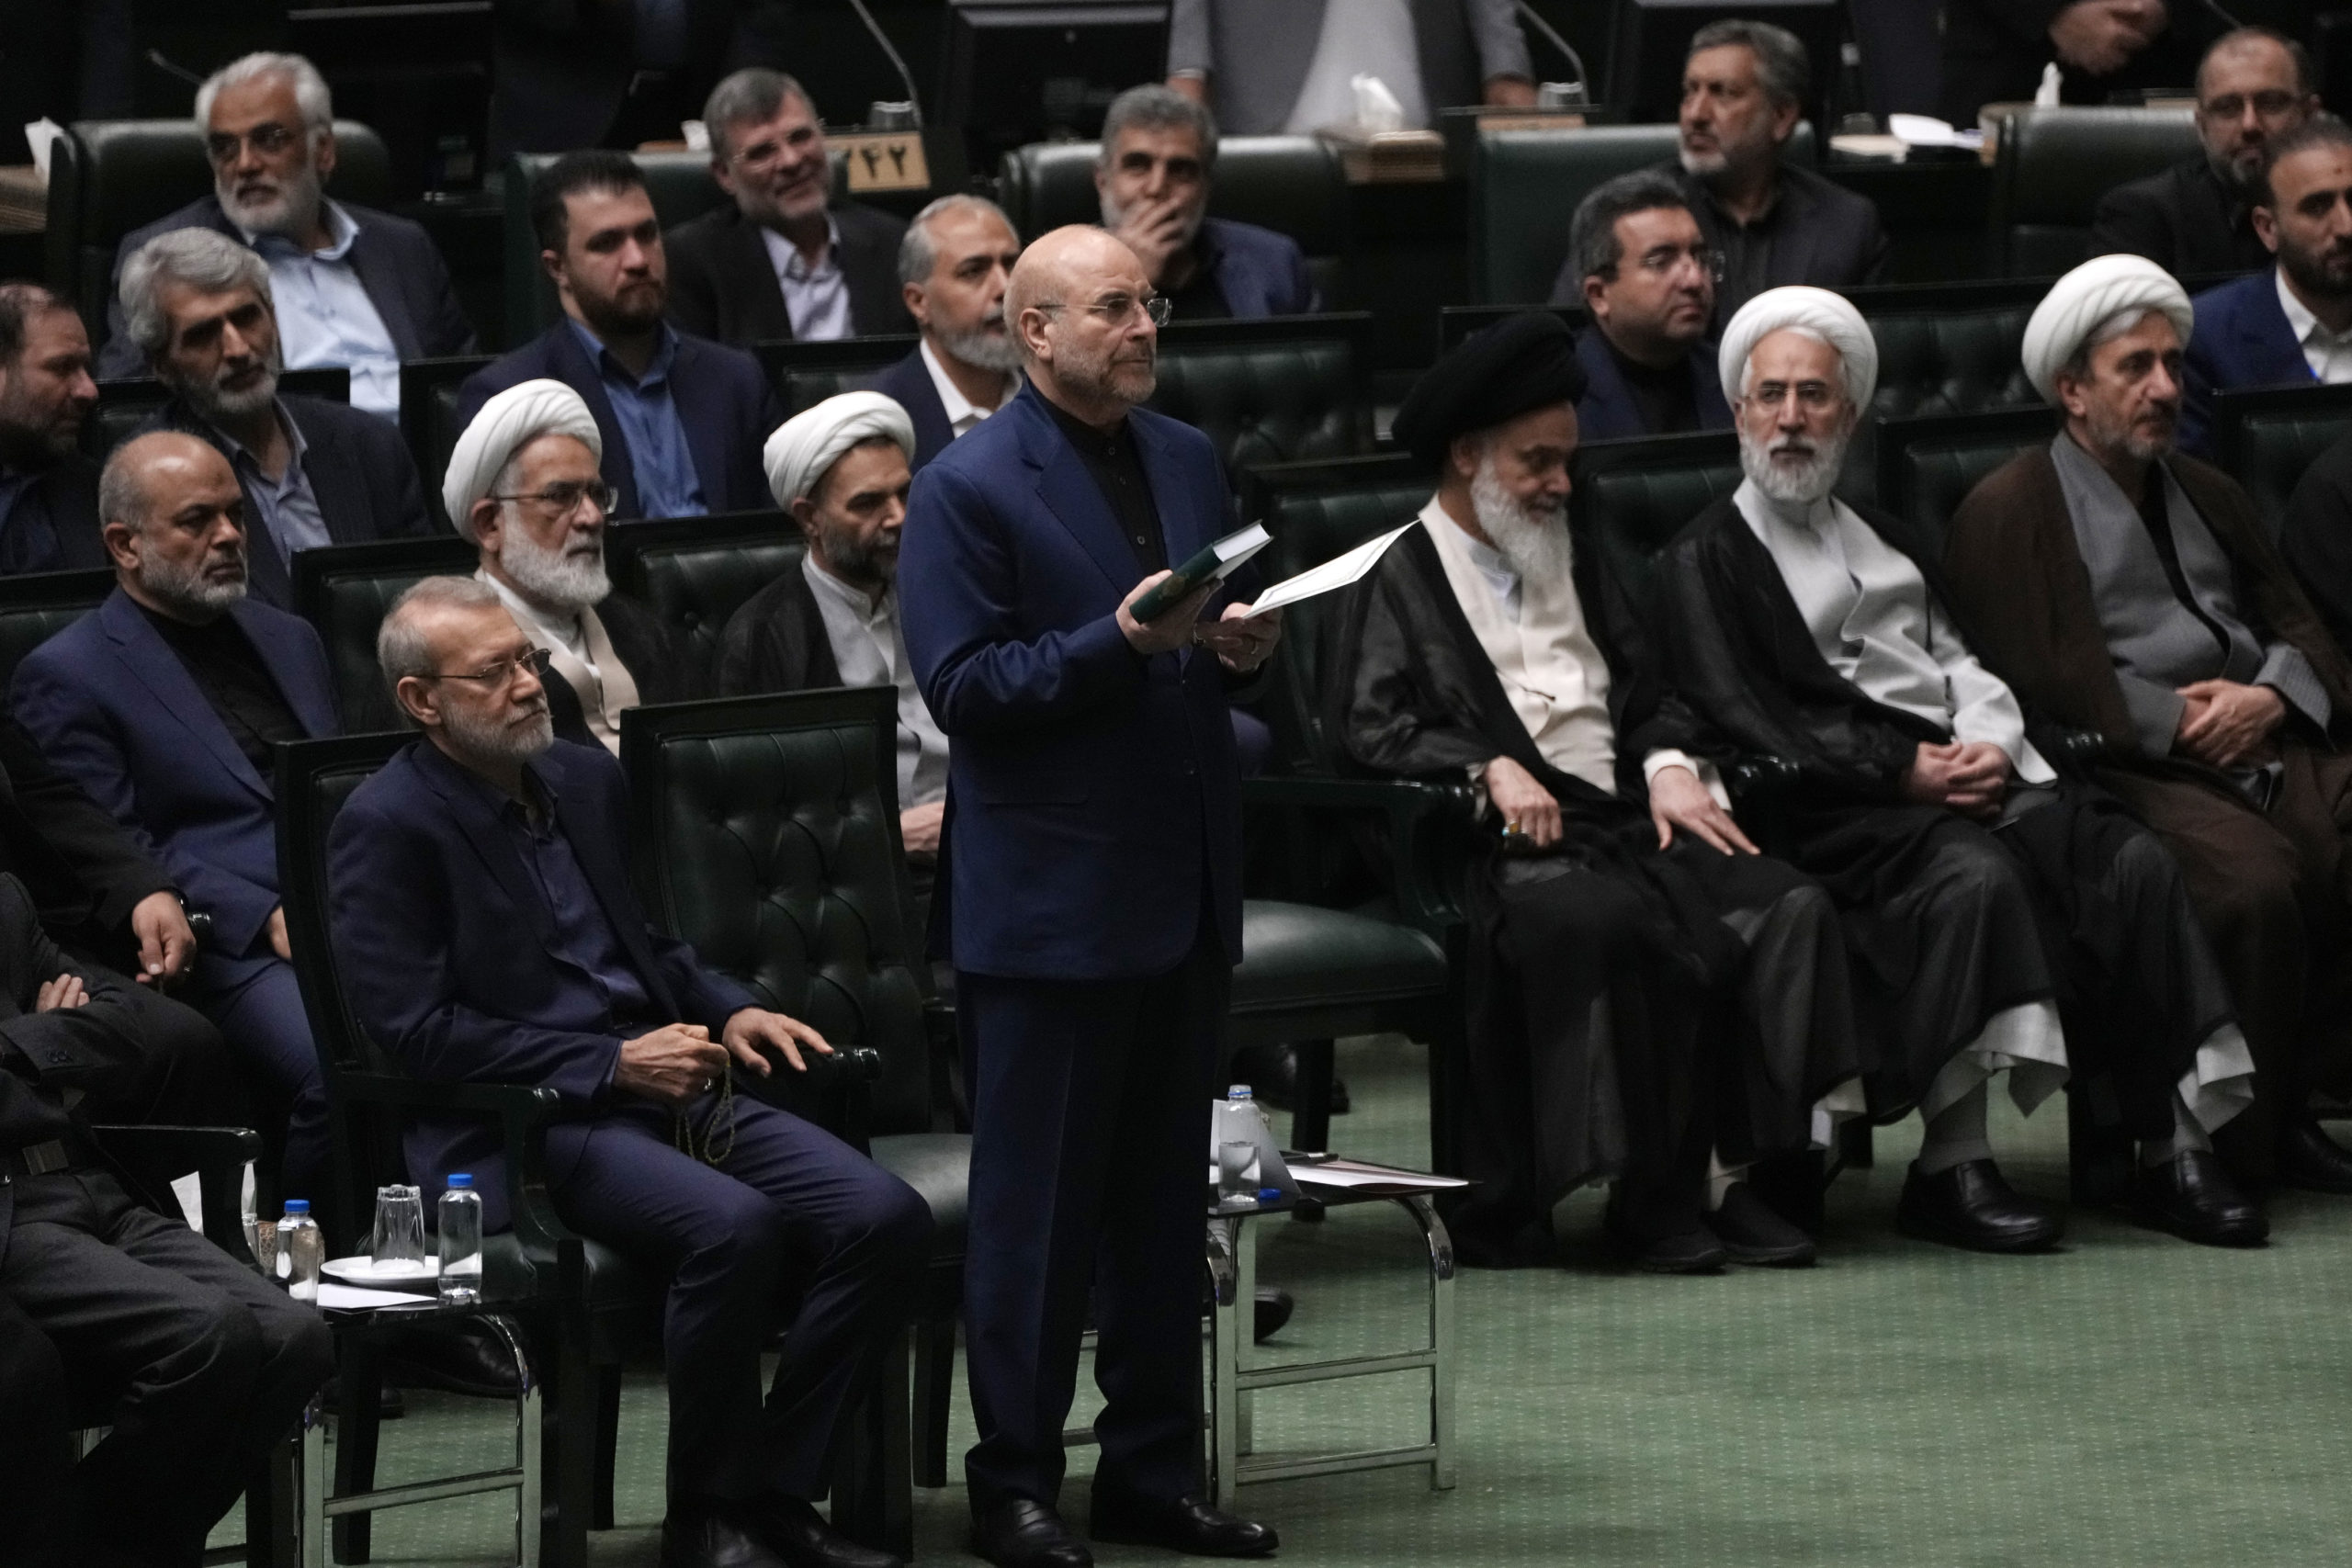 Iranian Conservative Associated with Revolutionary Guard Moves Closer to Presidency